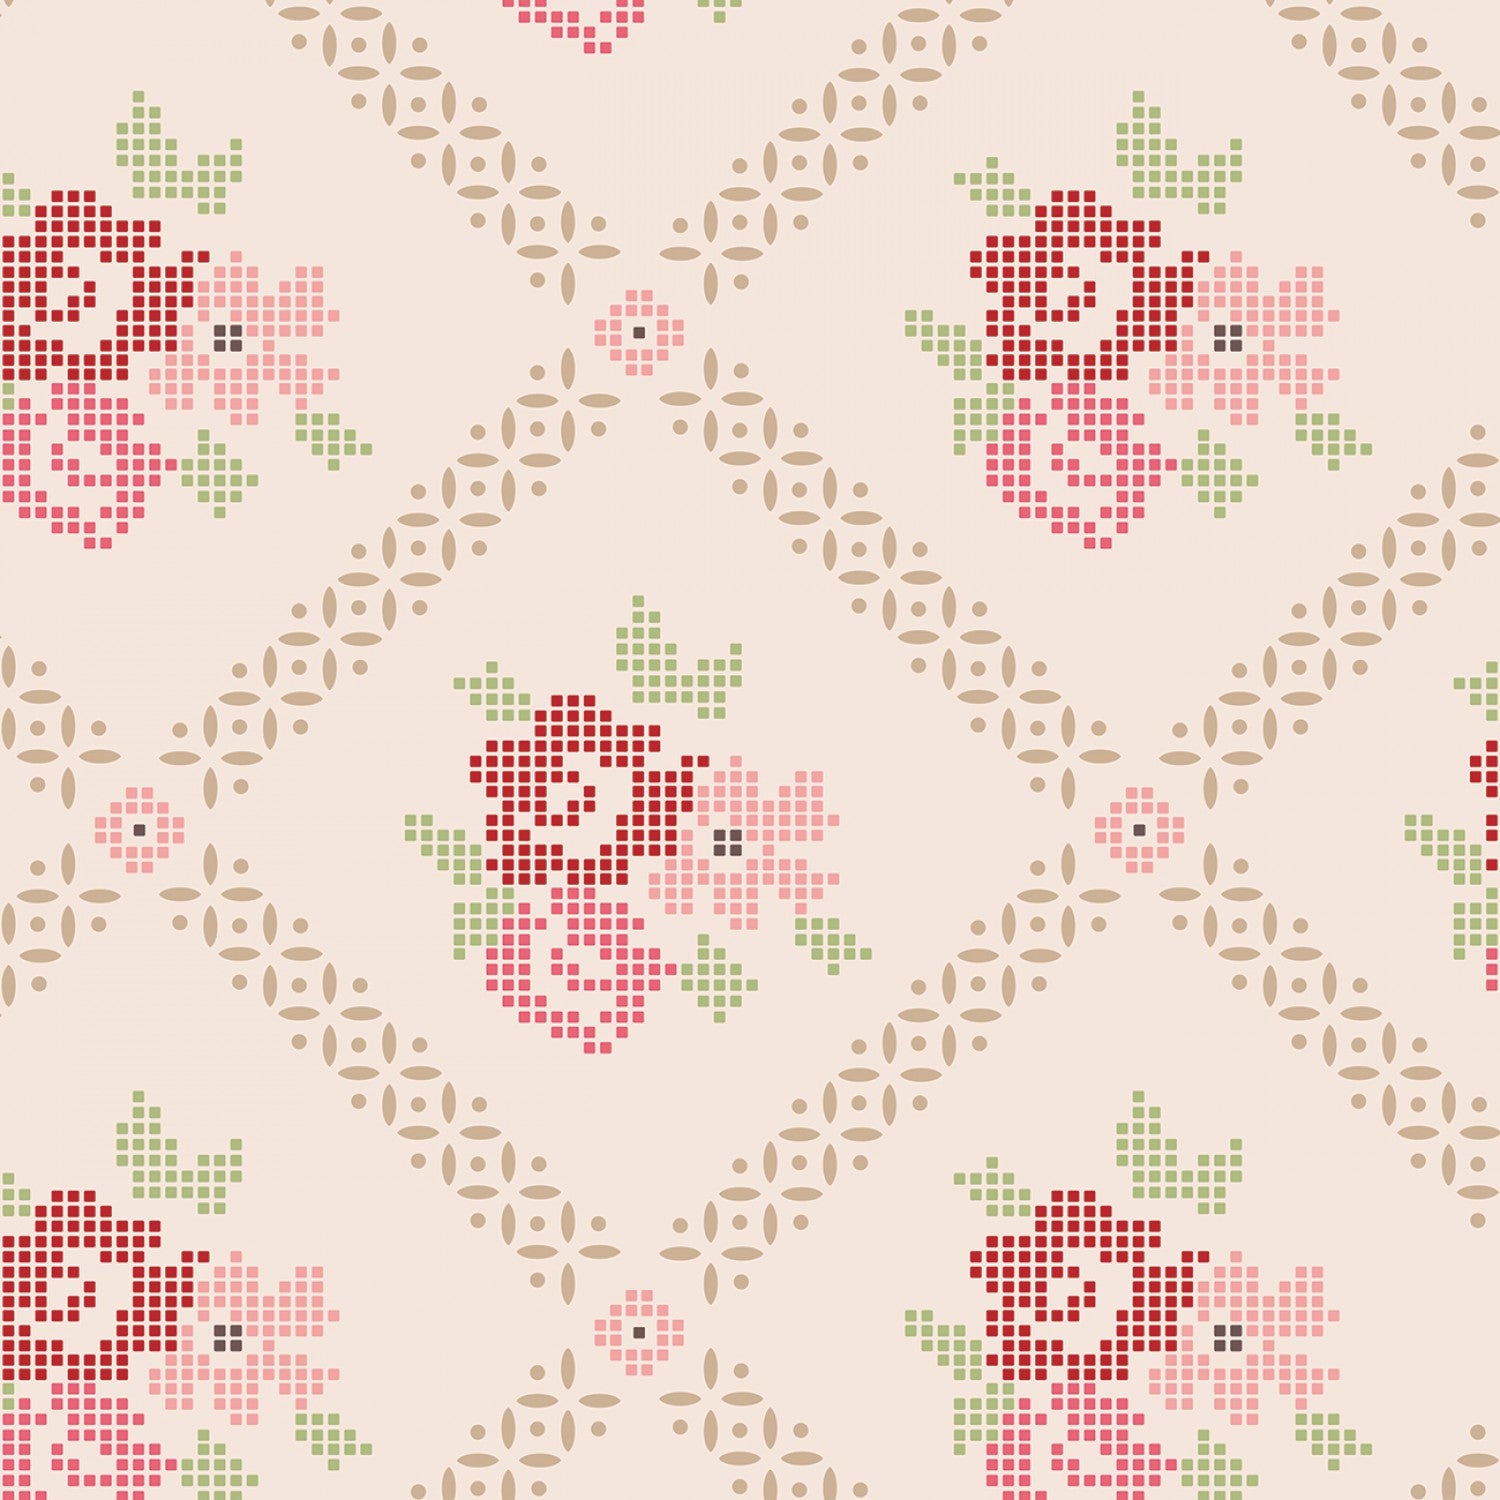 Mercantile - Adore Pinks 108" Wide Backing Fabric by Lori Holt for Riley Blake